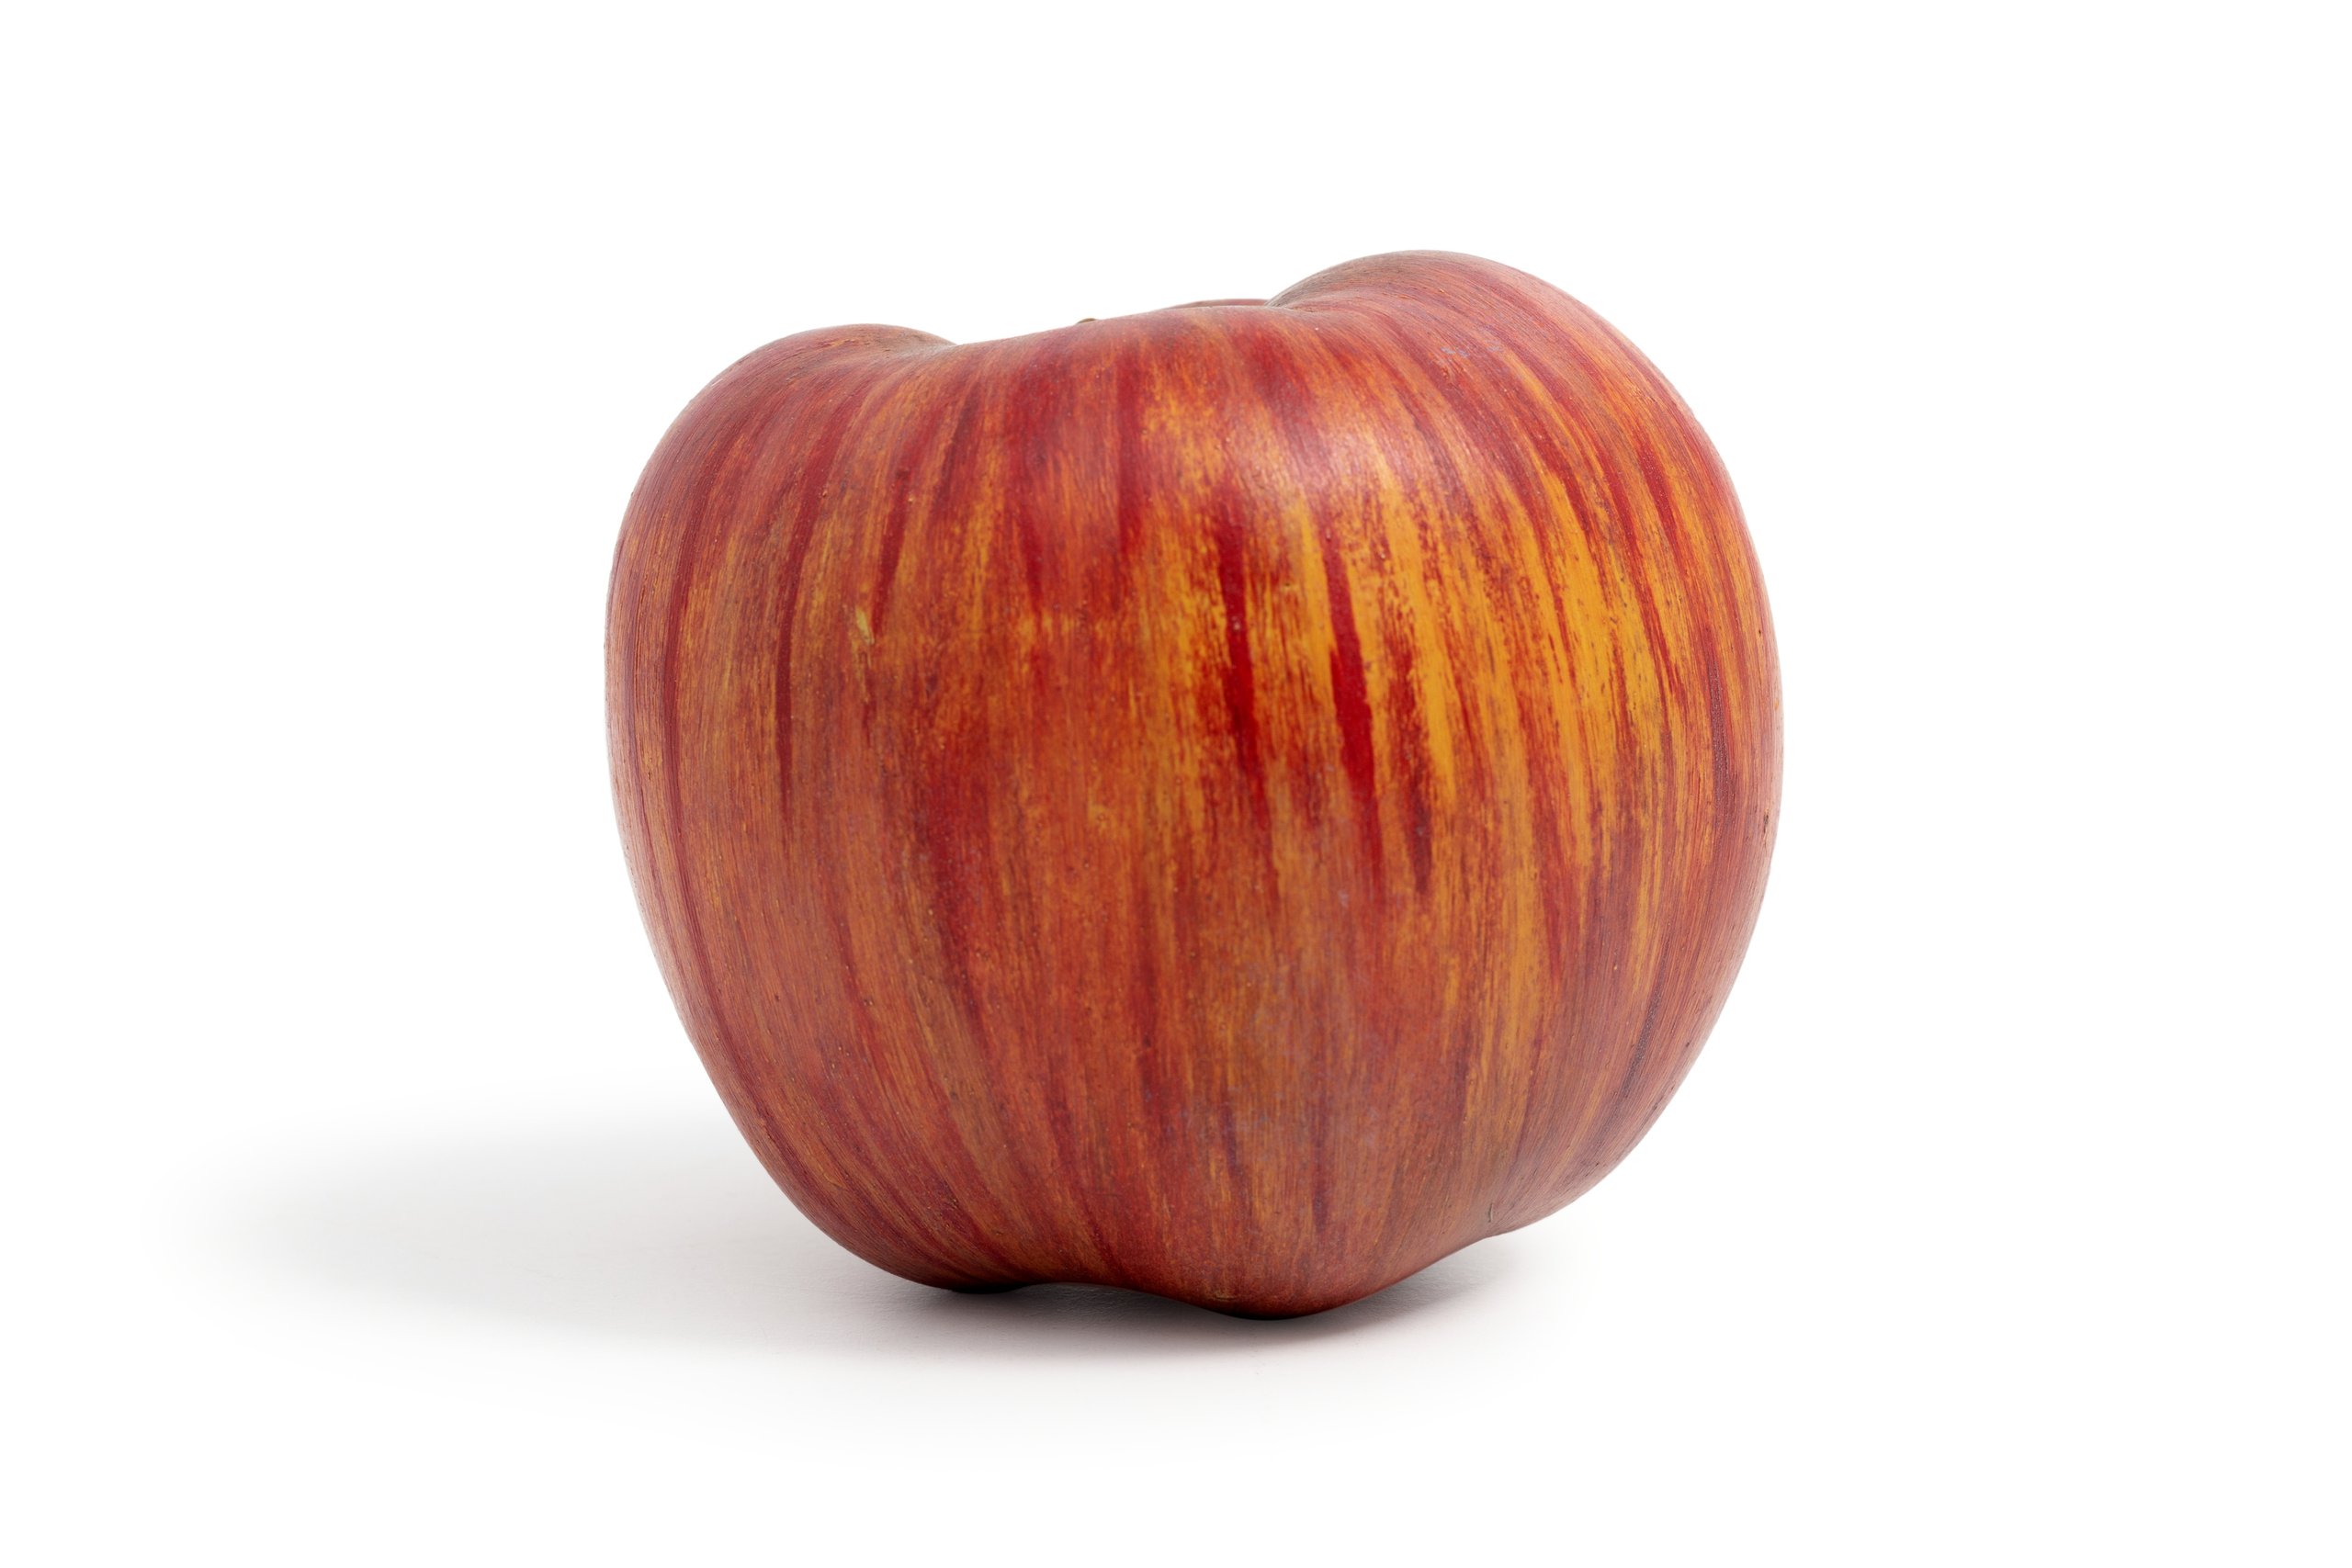 Model of a 'Moss Incomparable' apple